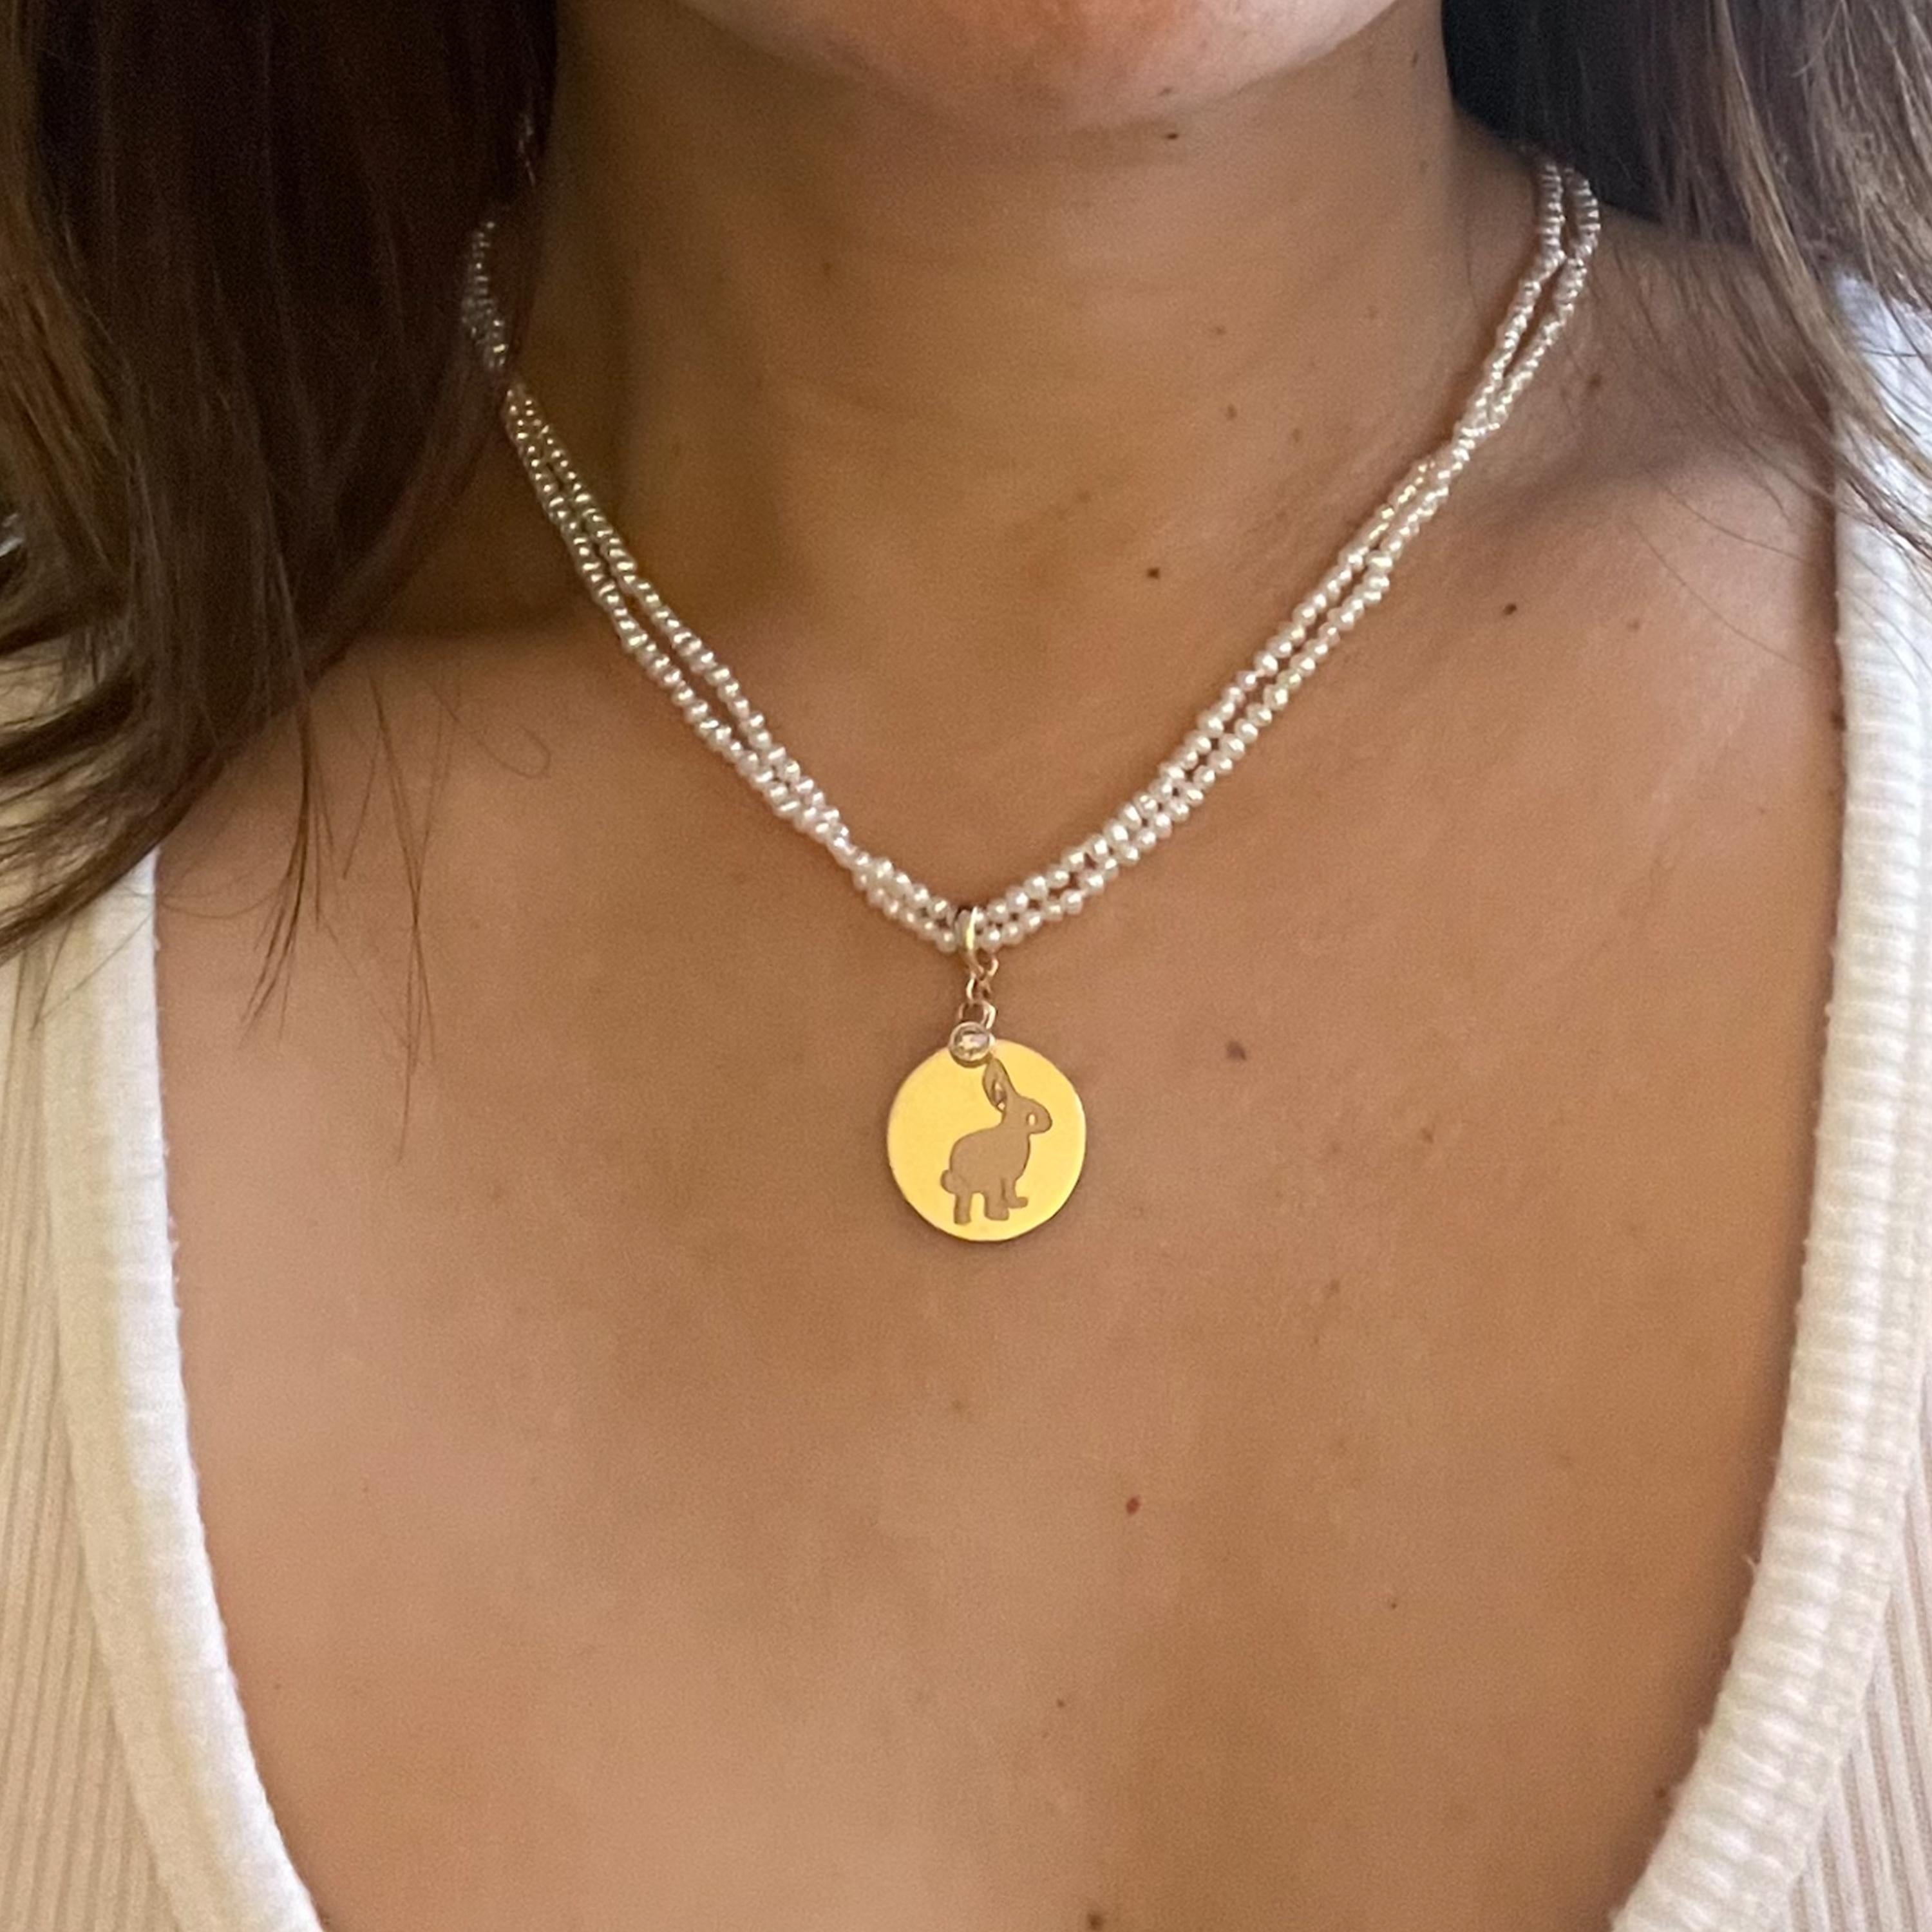 This is a new contemporary pearl necklace with a removable gold pendant, that can be worn two ways.
The beloved Bunny design element is engraved on a gold disc with a diamond charm and hangs off of two rows of SeedPearls.

Depending on your mood,